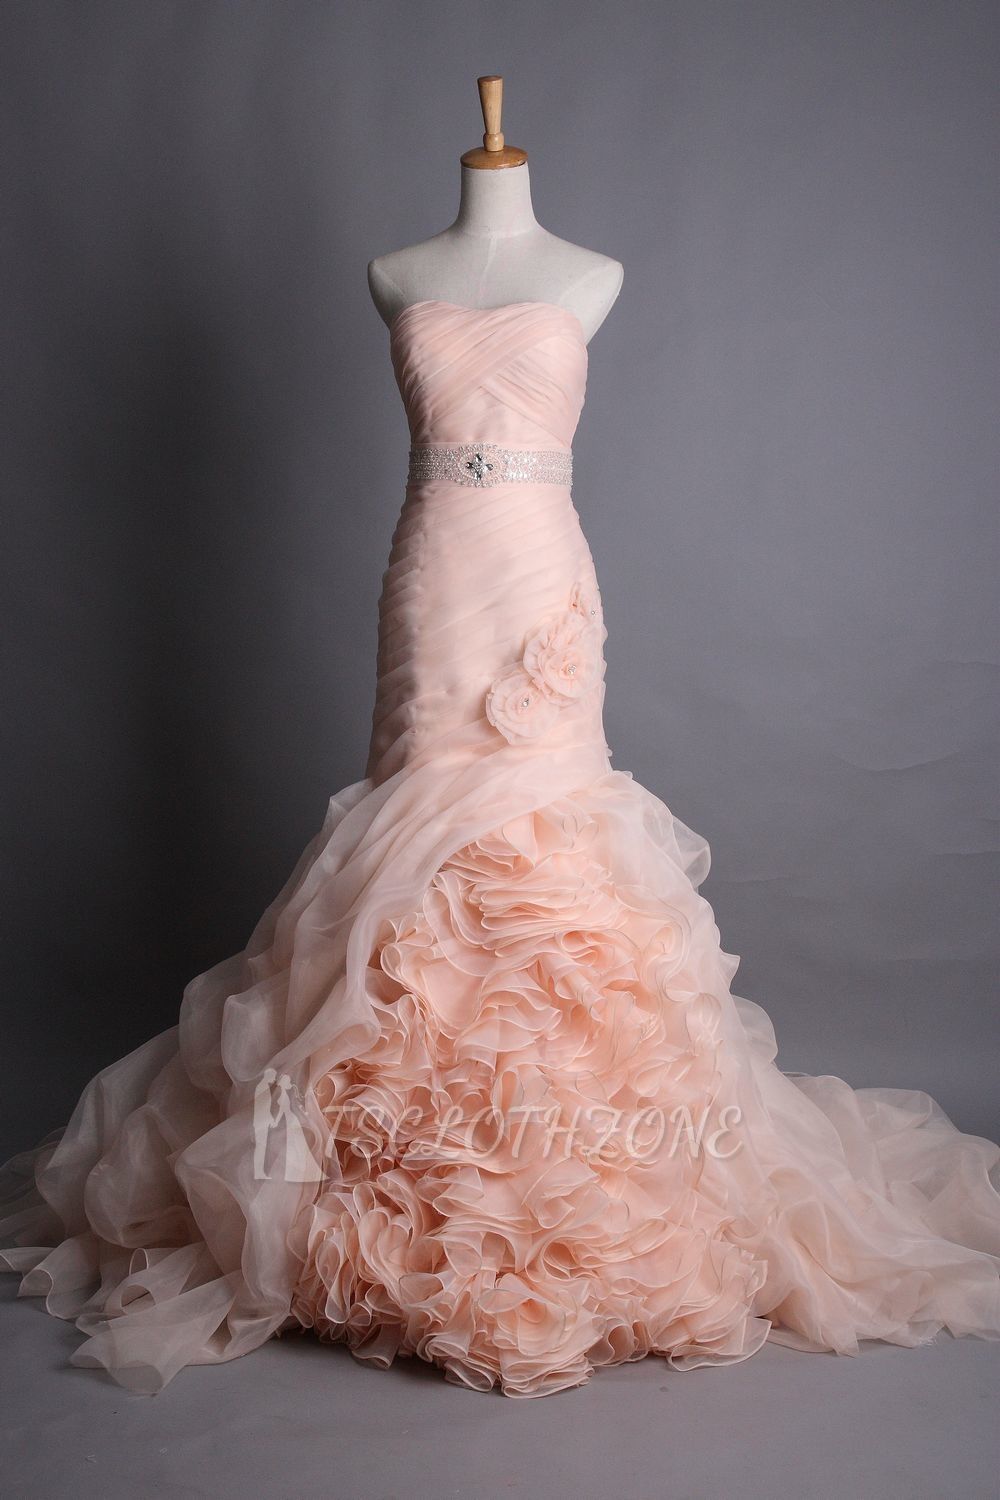 Elegant Sweetheart Pink Organza Bridal Gowns Ruffle Tiered Flower Unique Sheath Wedding Dresses with Beadings